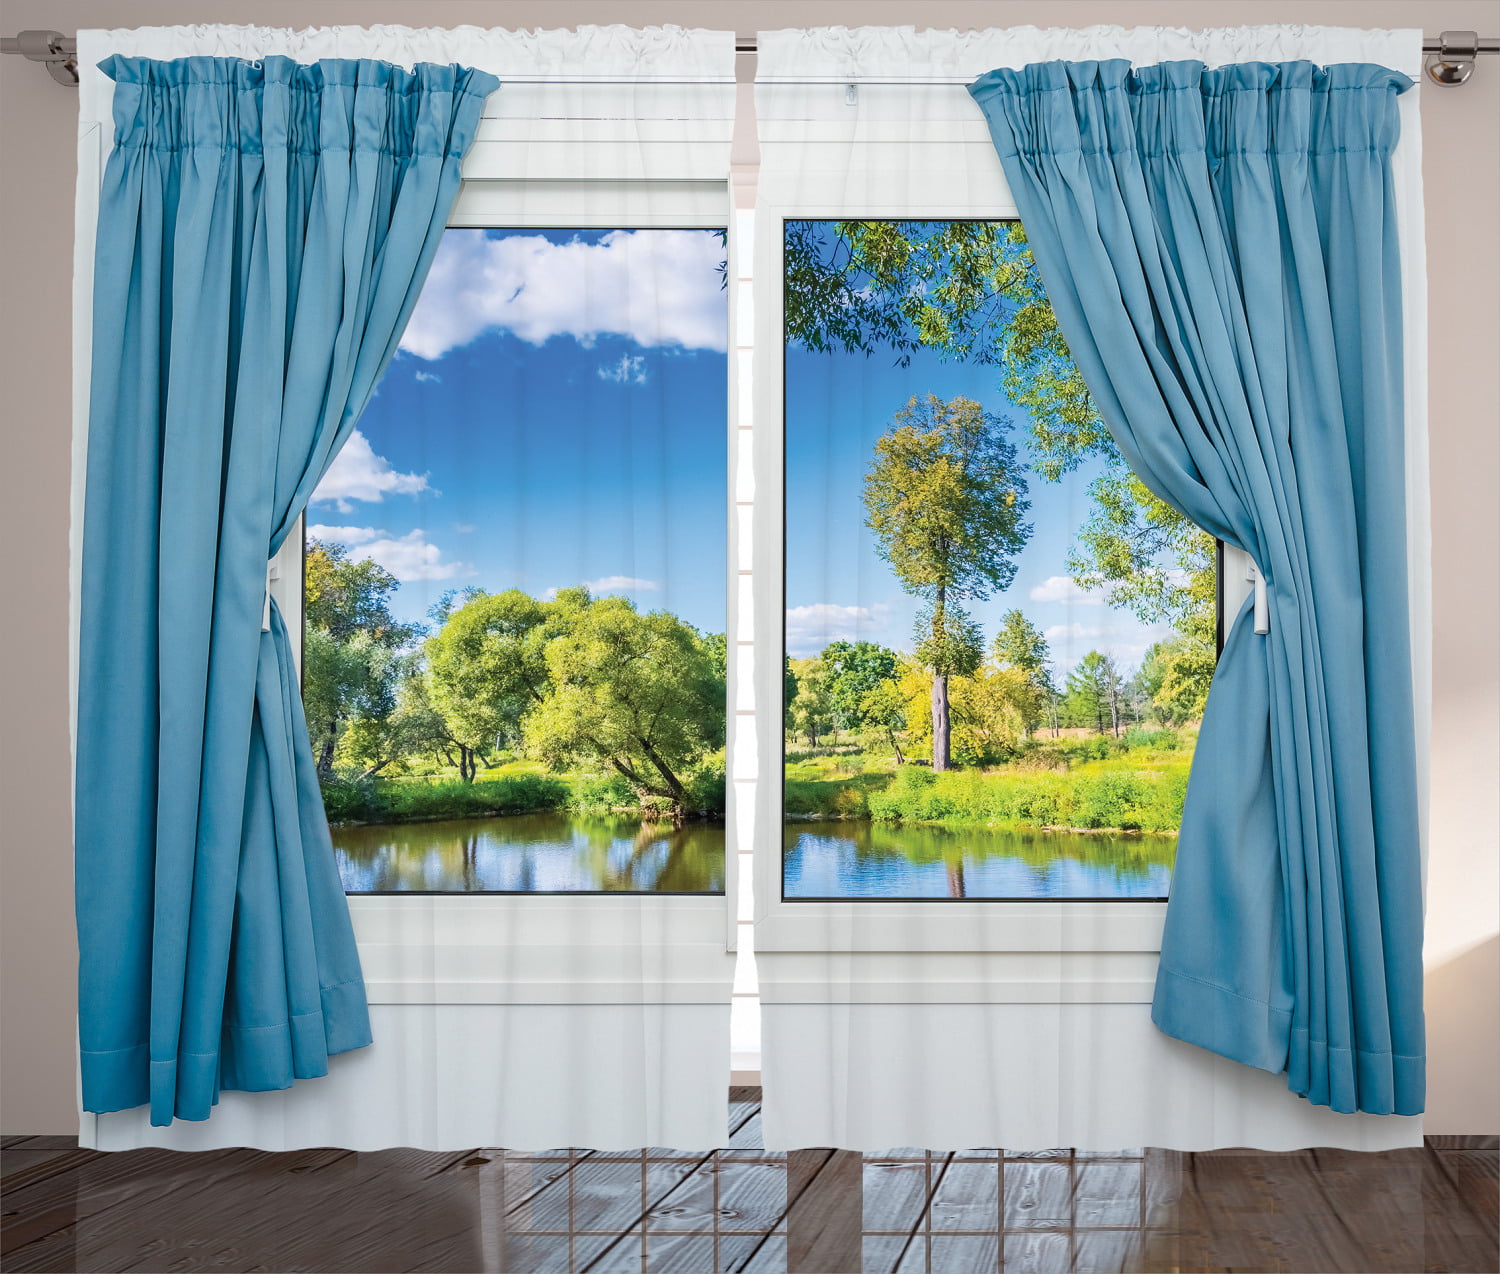 3D Sunset Windows Curtains Drapes Windows Curtain for Living Room Bedroom 